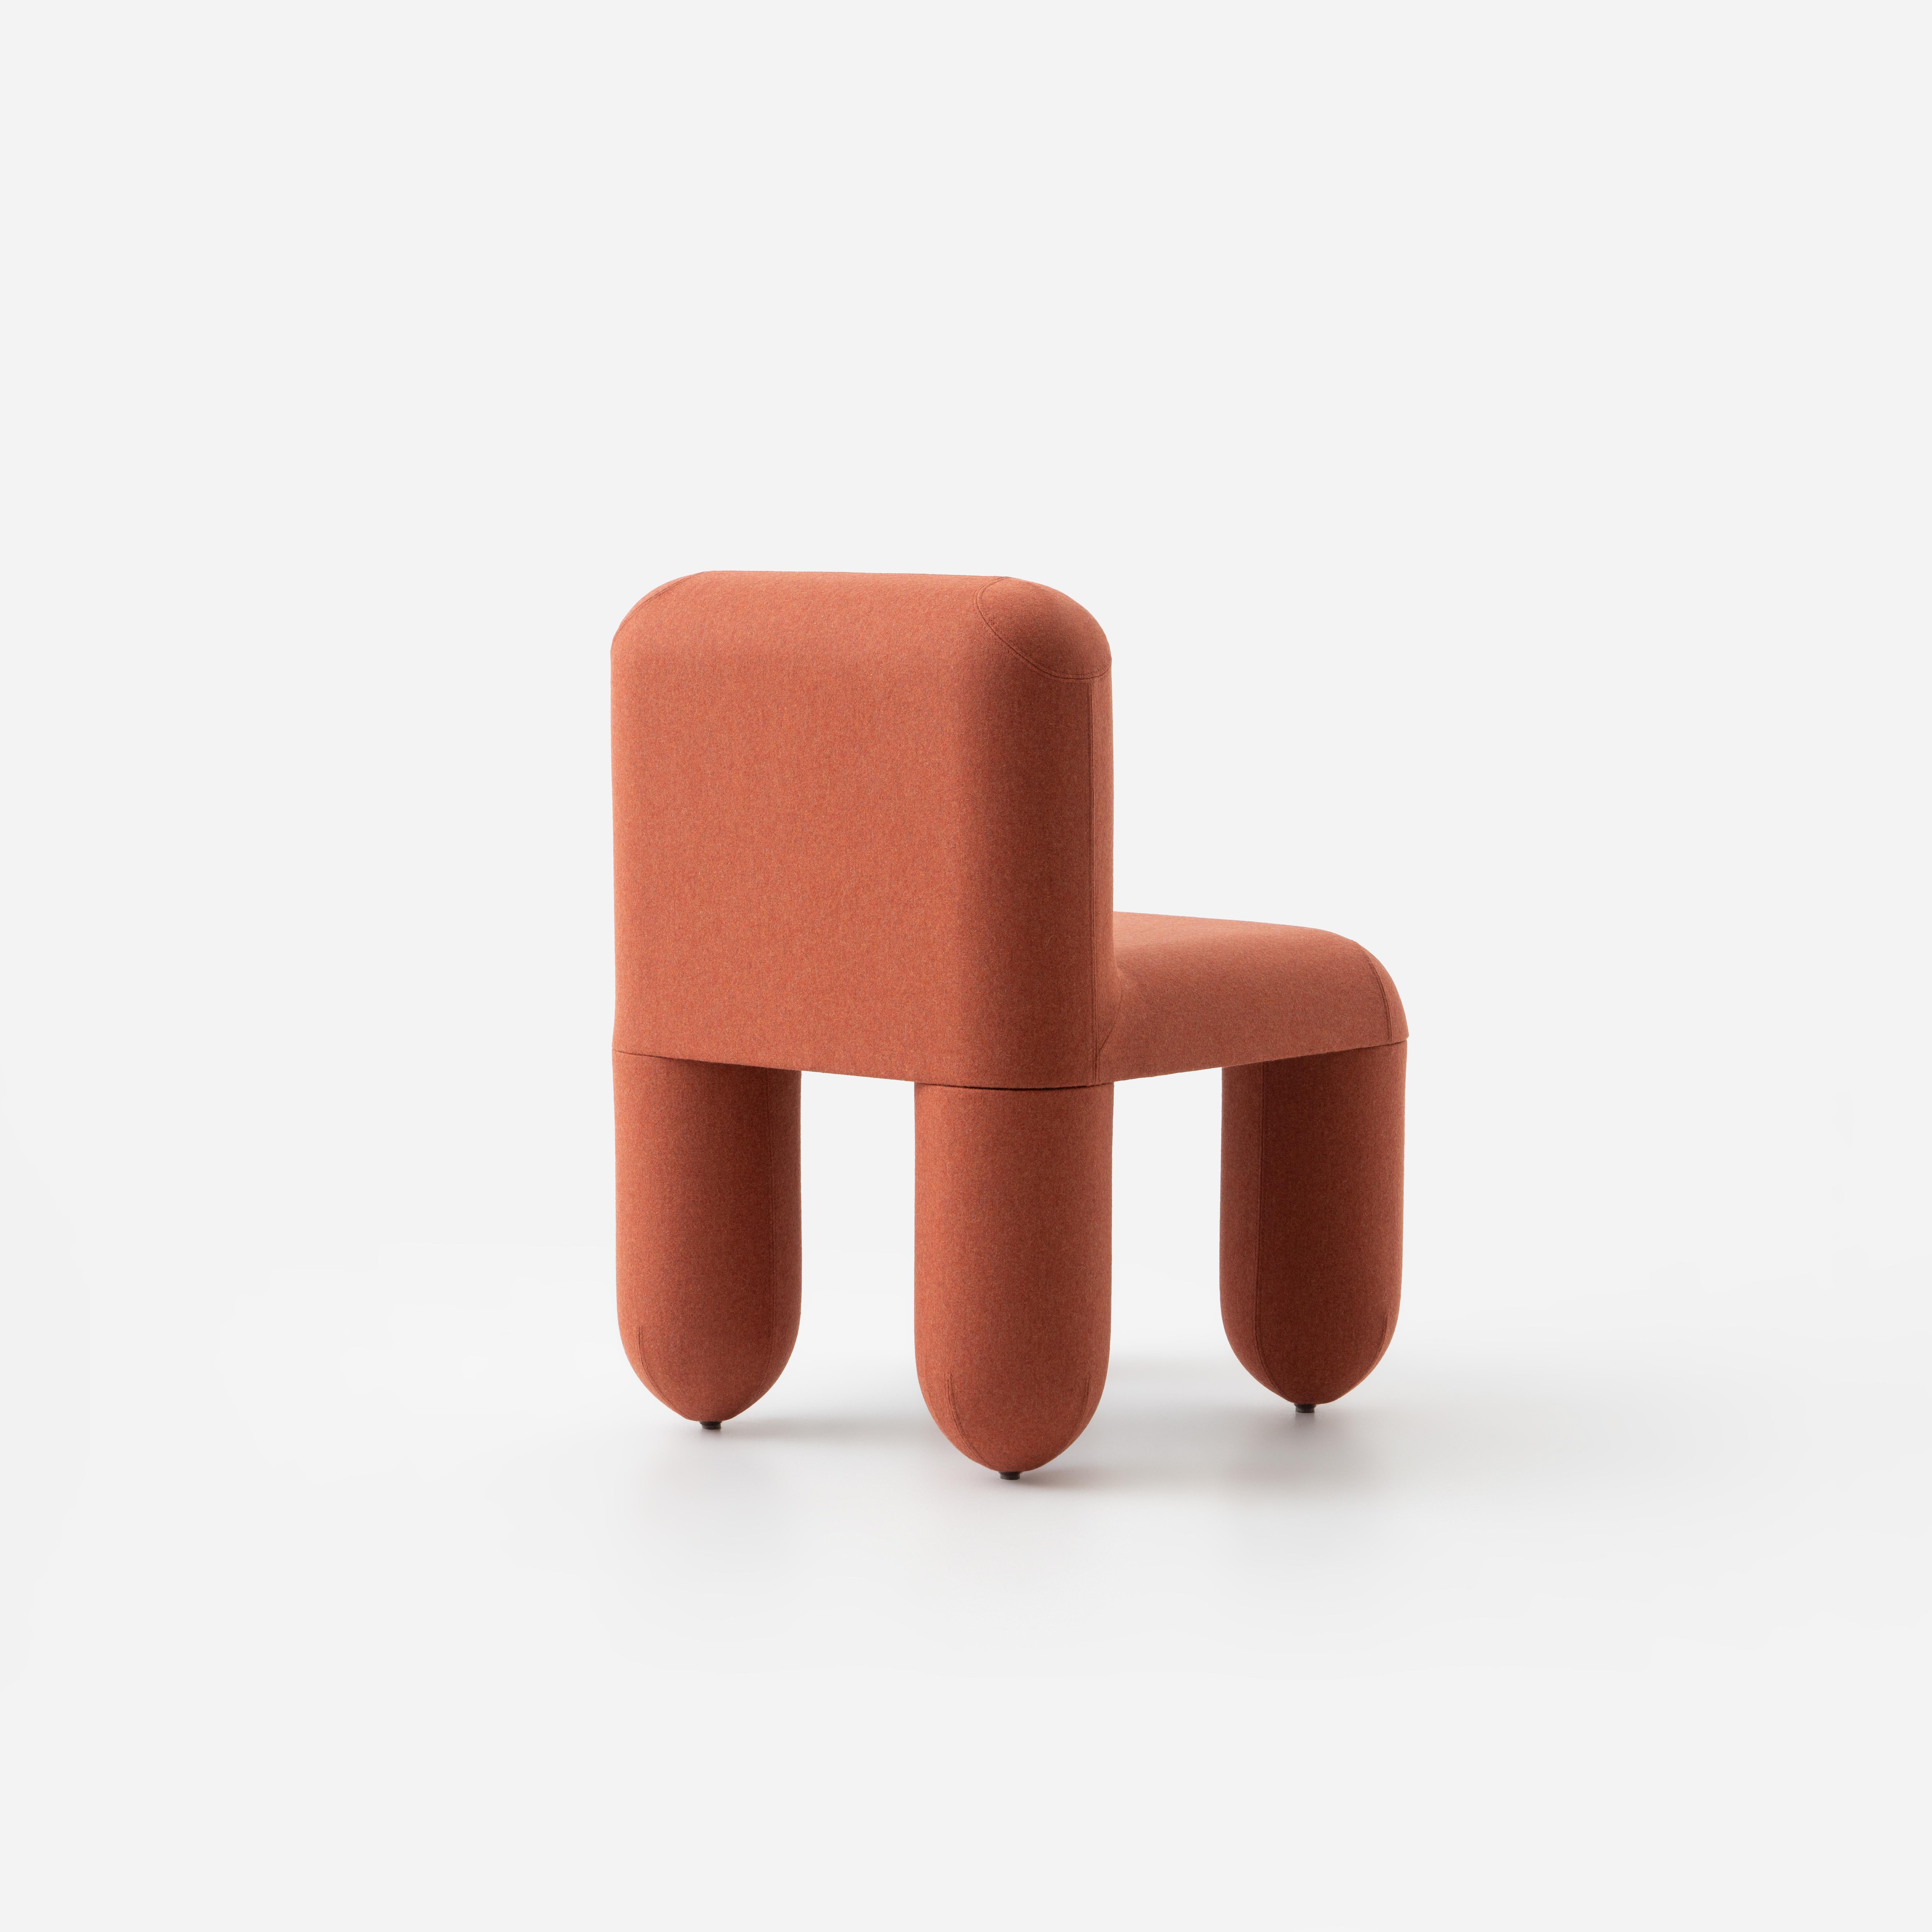 Contemporary Dining Chair 'Hello' by Denys Sokolov x Noom, Orange For Sale 4